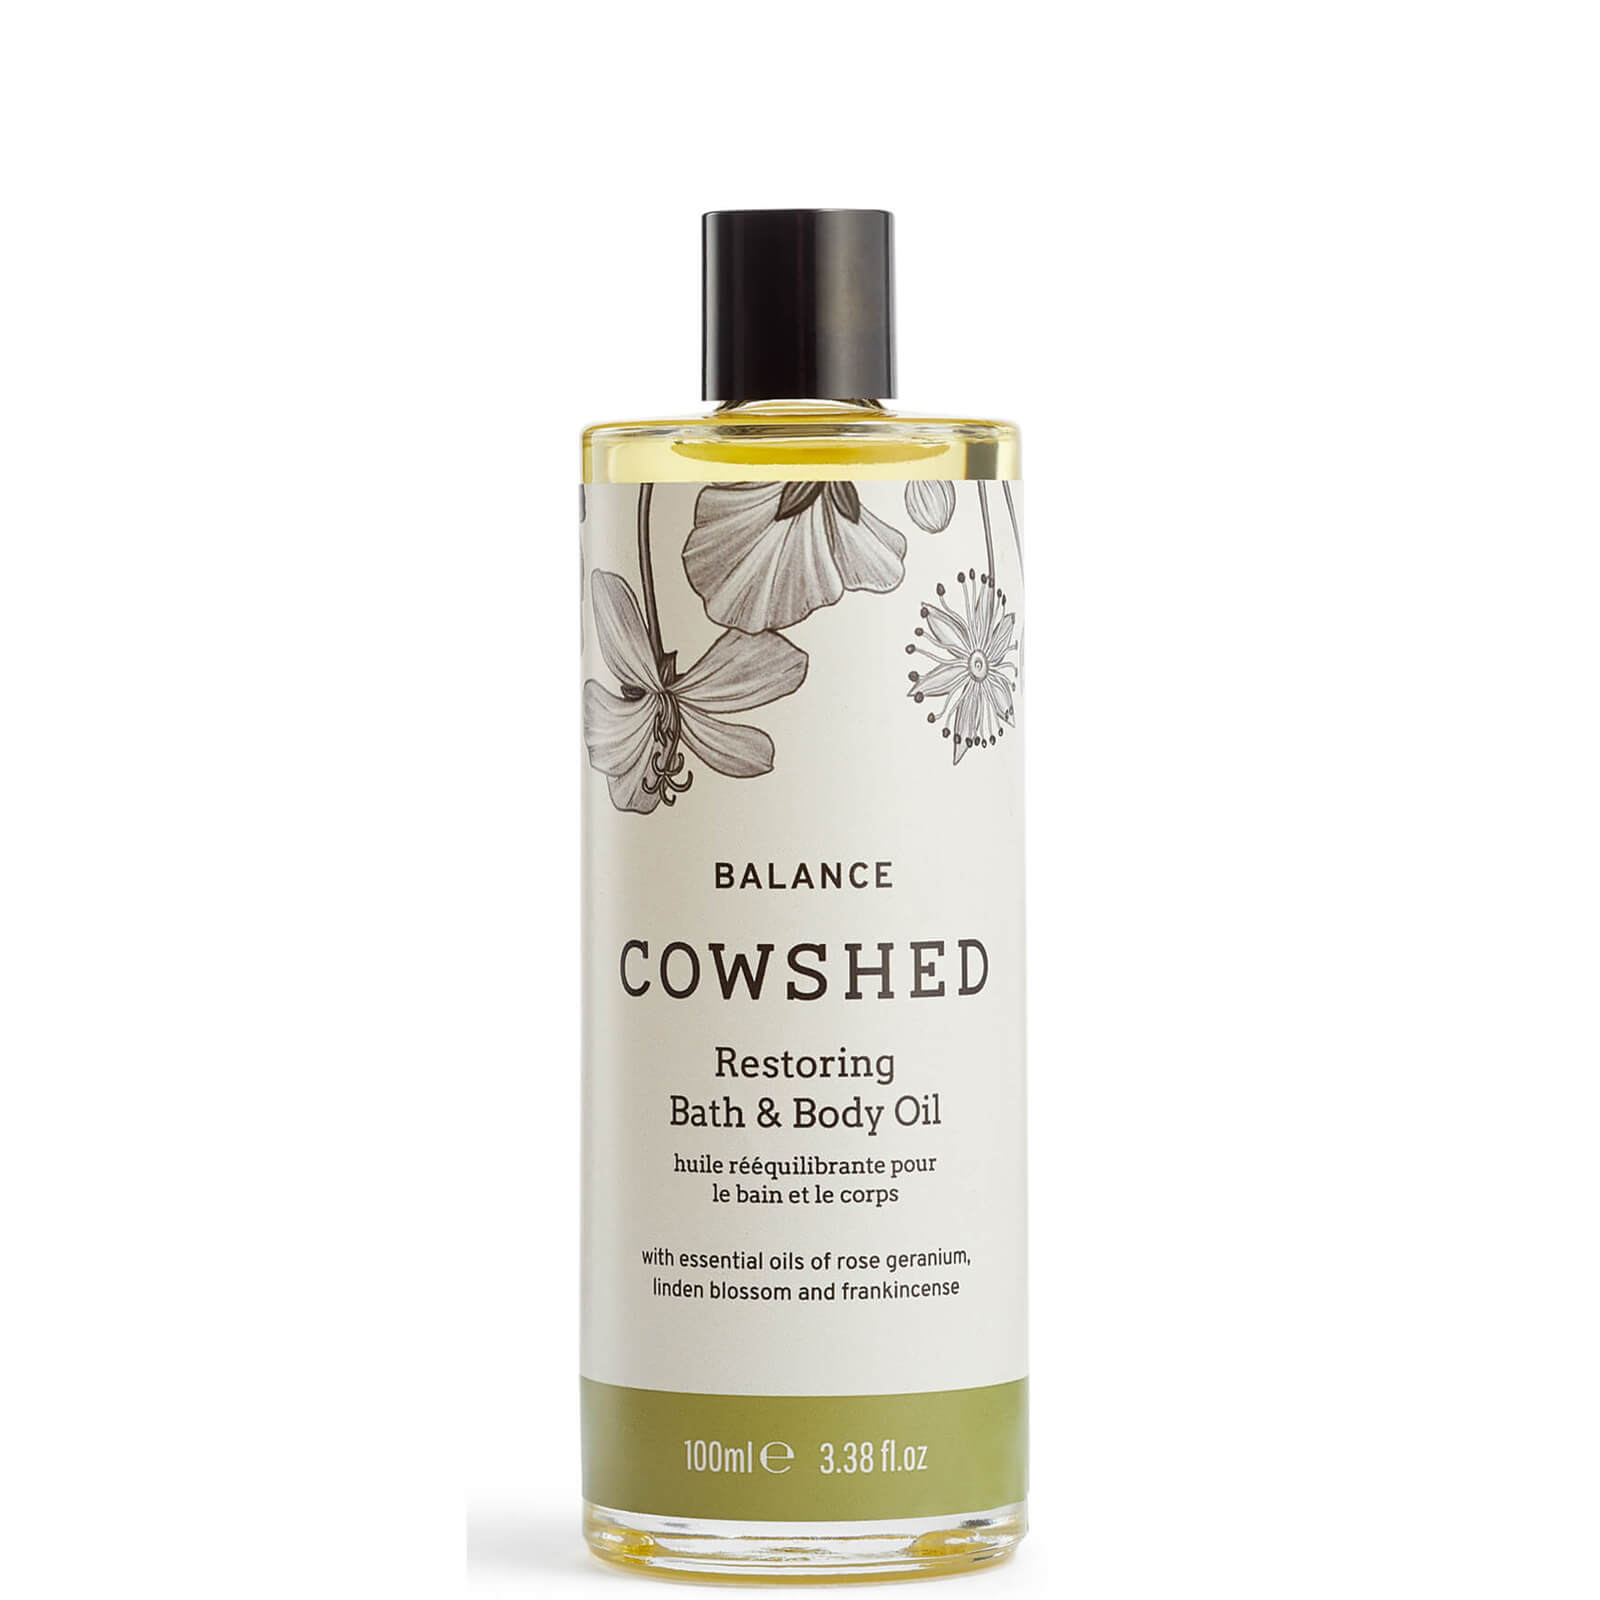 Image of Cowshed BALANCE Restoring Bath & Body Oil 100ml